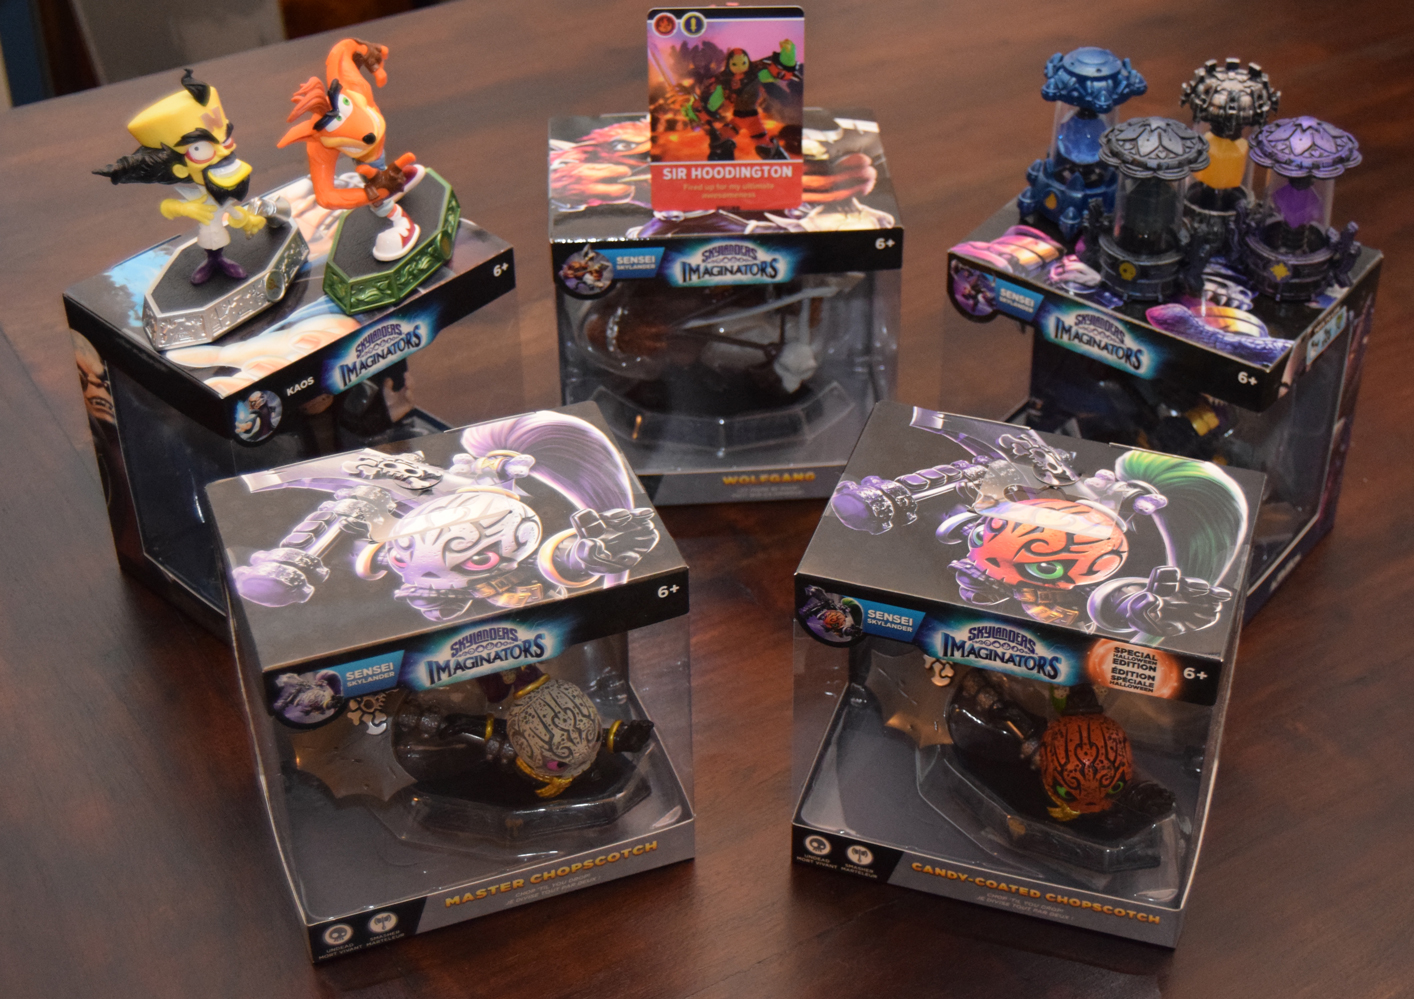 Candy-Coated Chopscotch with other Skylanders Imaginators figures